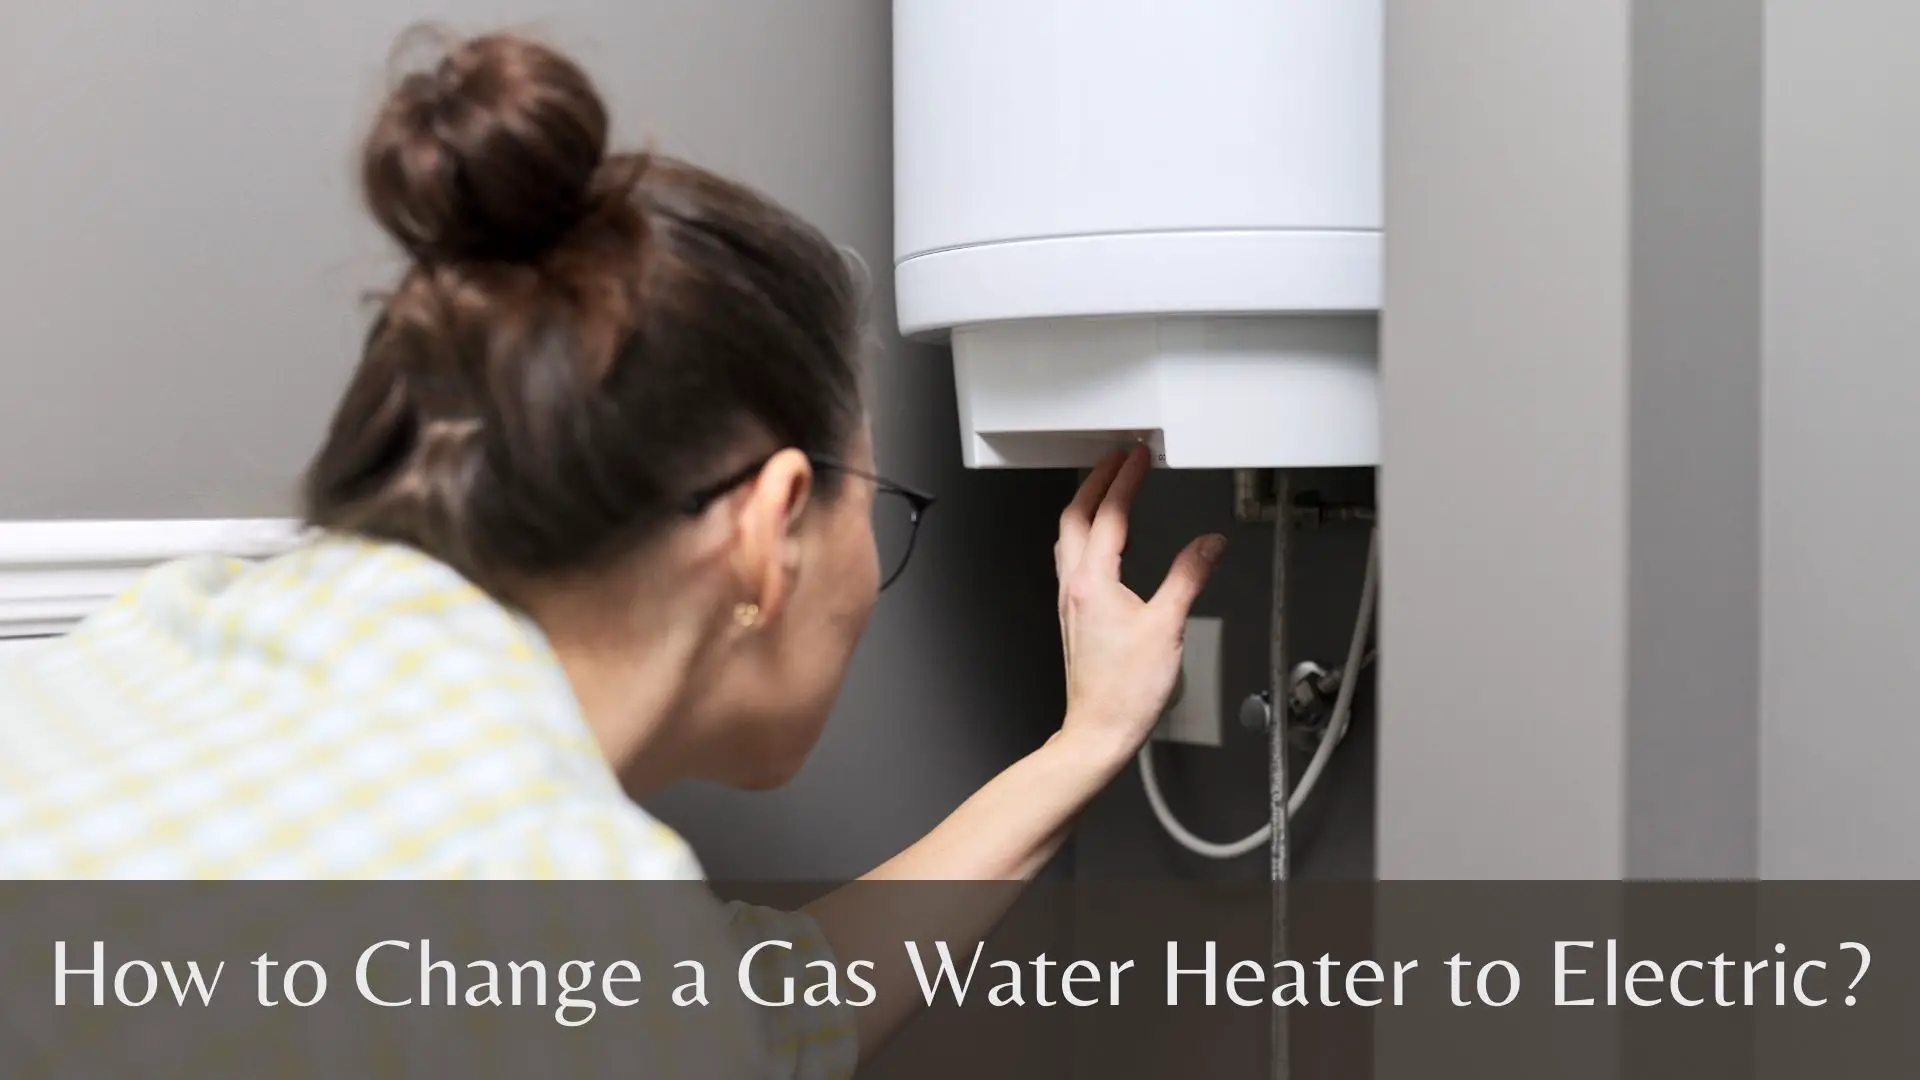 How to Change a Gas Water Heater to Electric